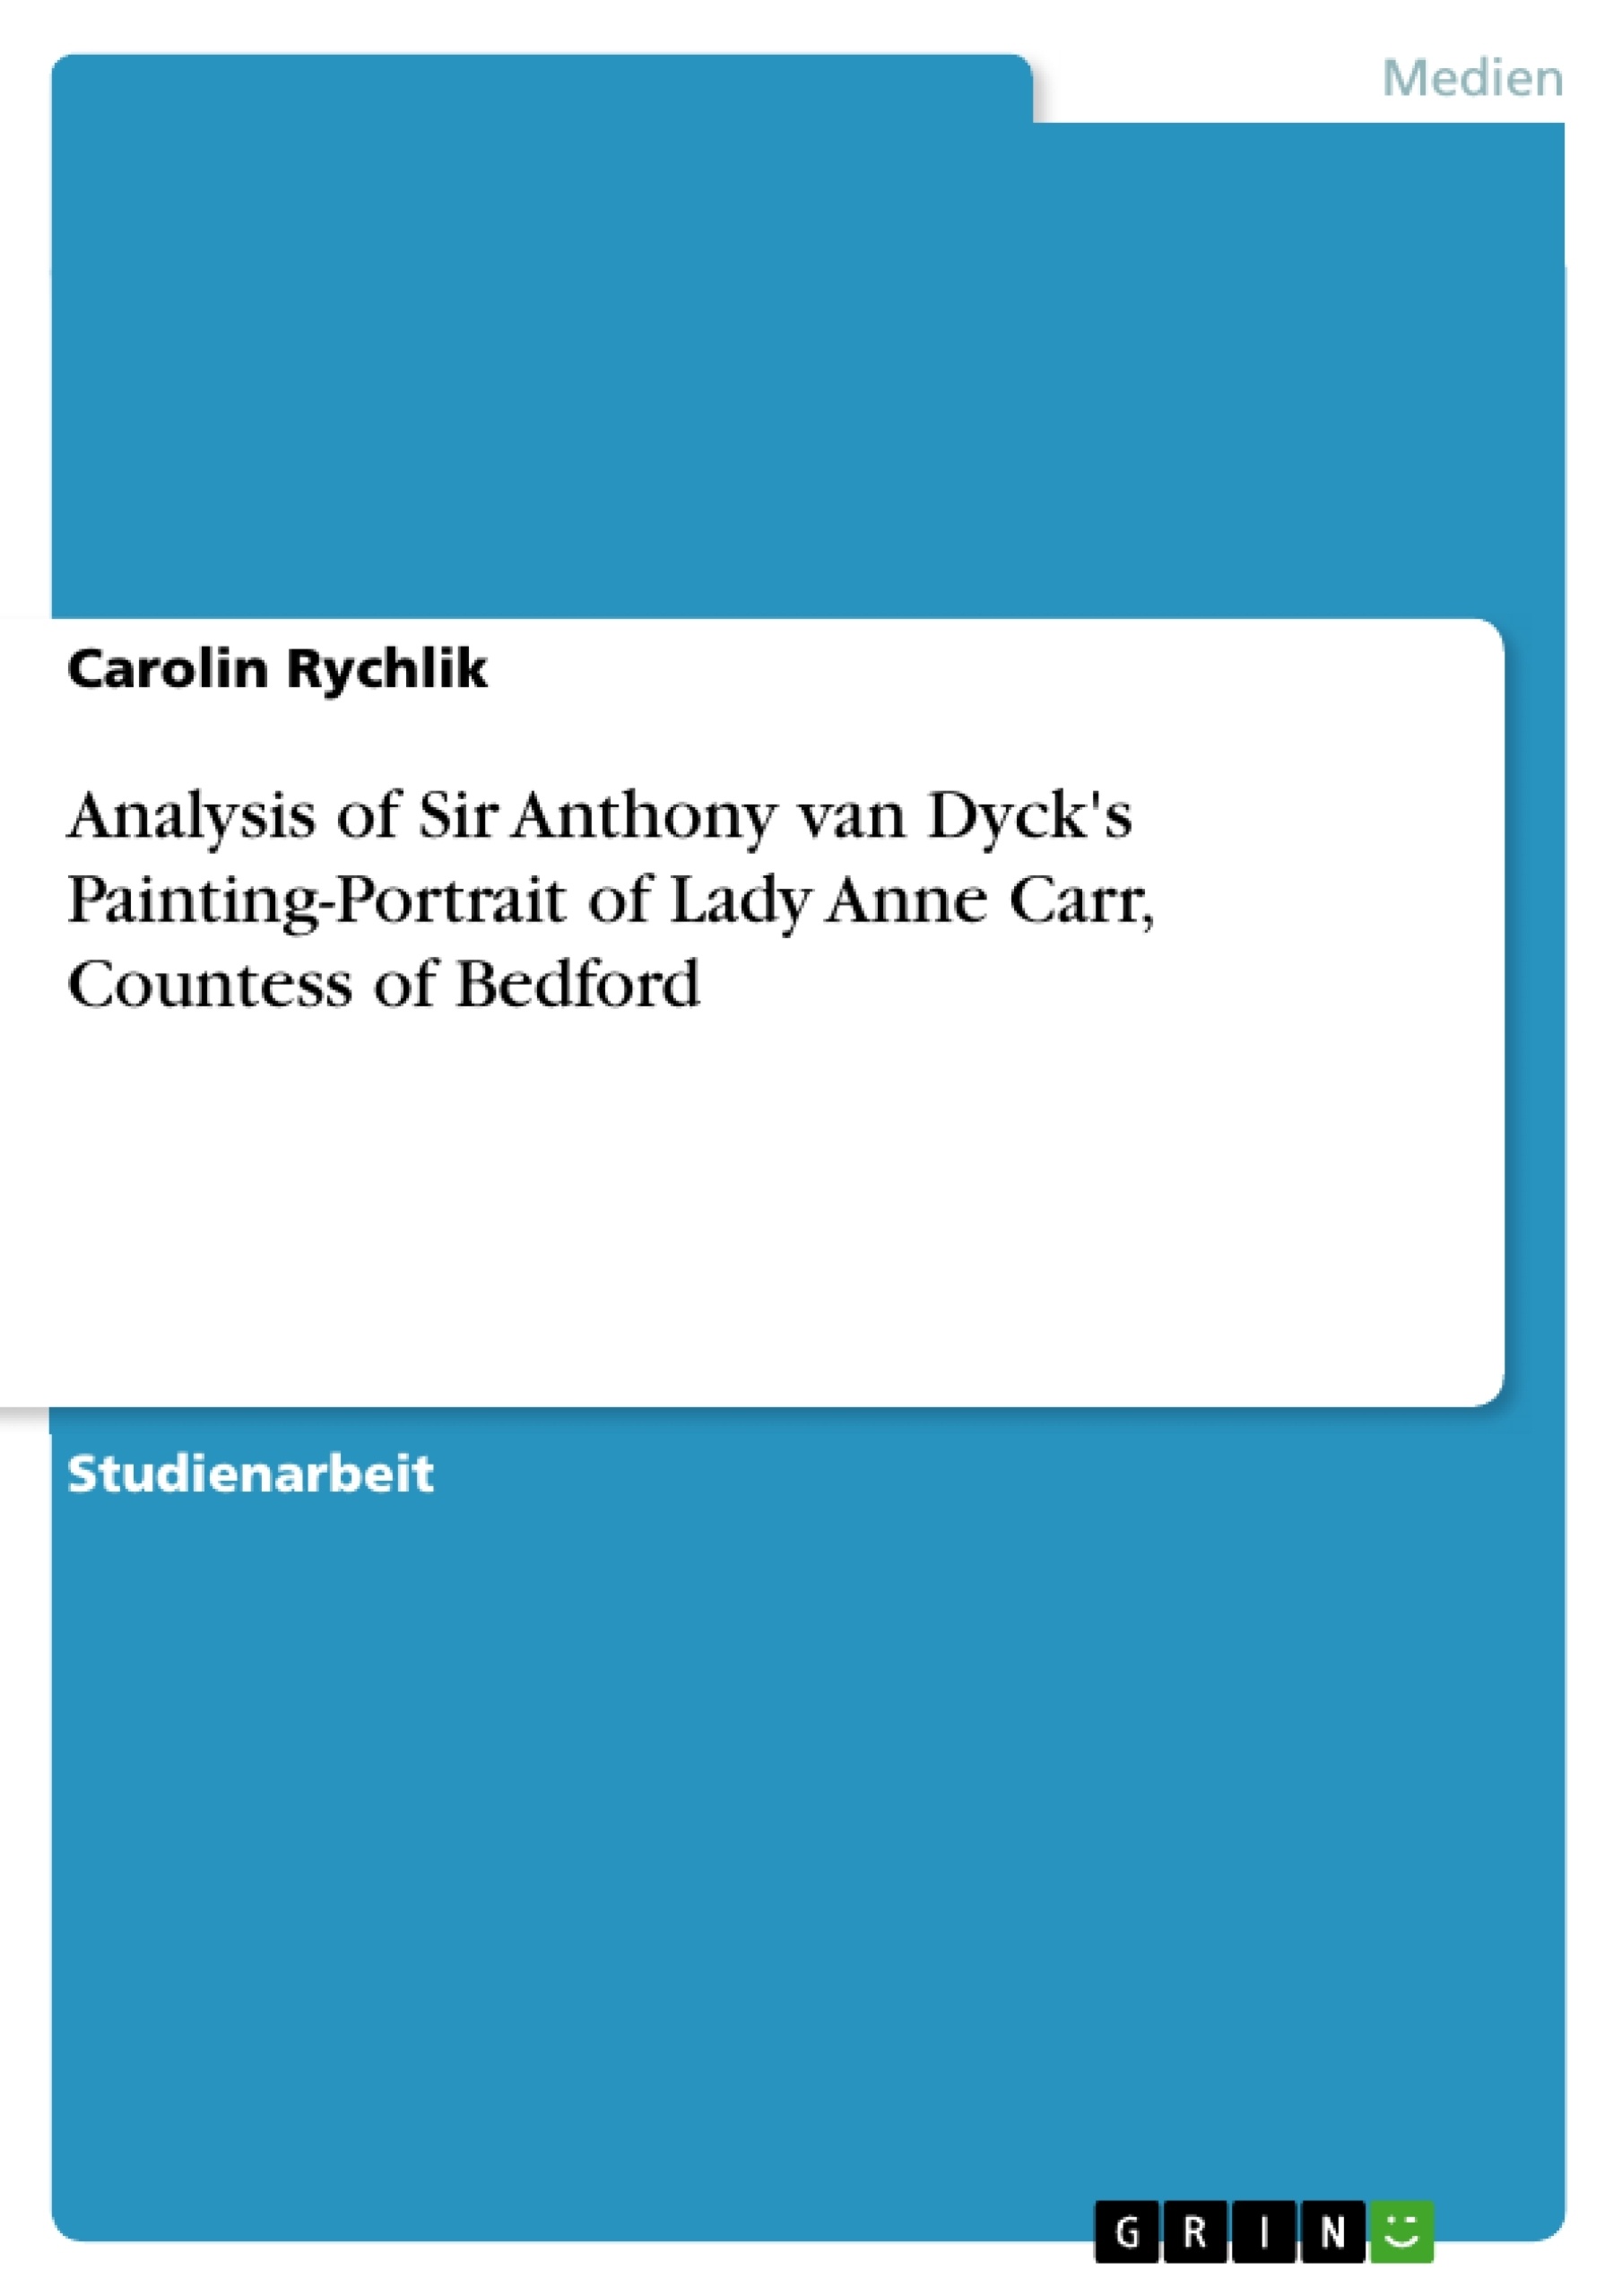 Titre: Analysis of Sir Anthony van Dyck's Painting-Portrait of Lady Anne Carr, Countess of Bedford